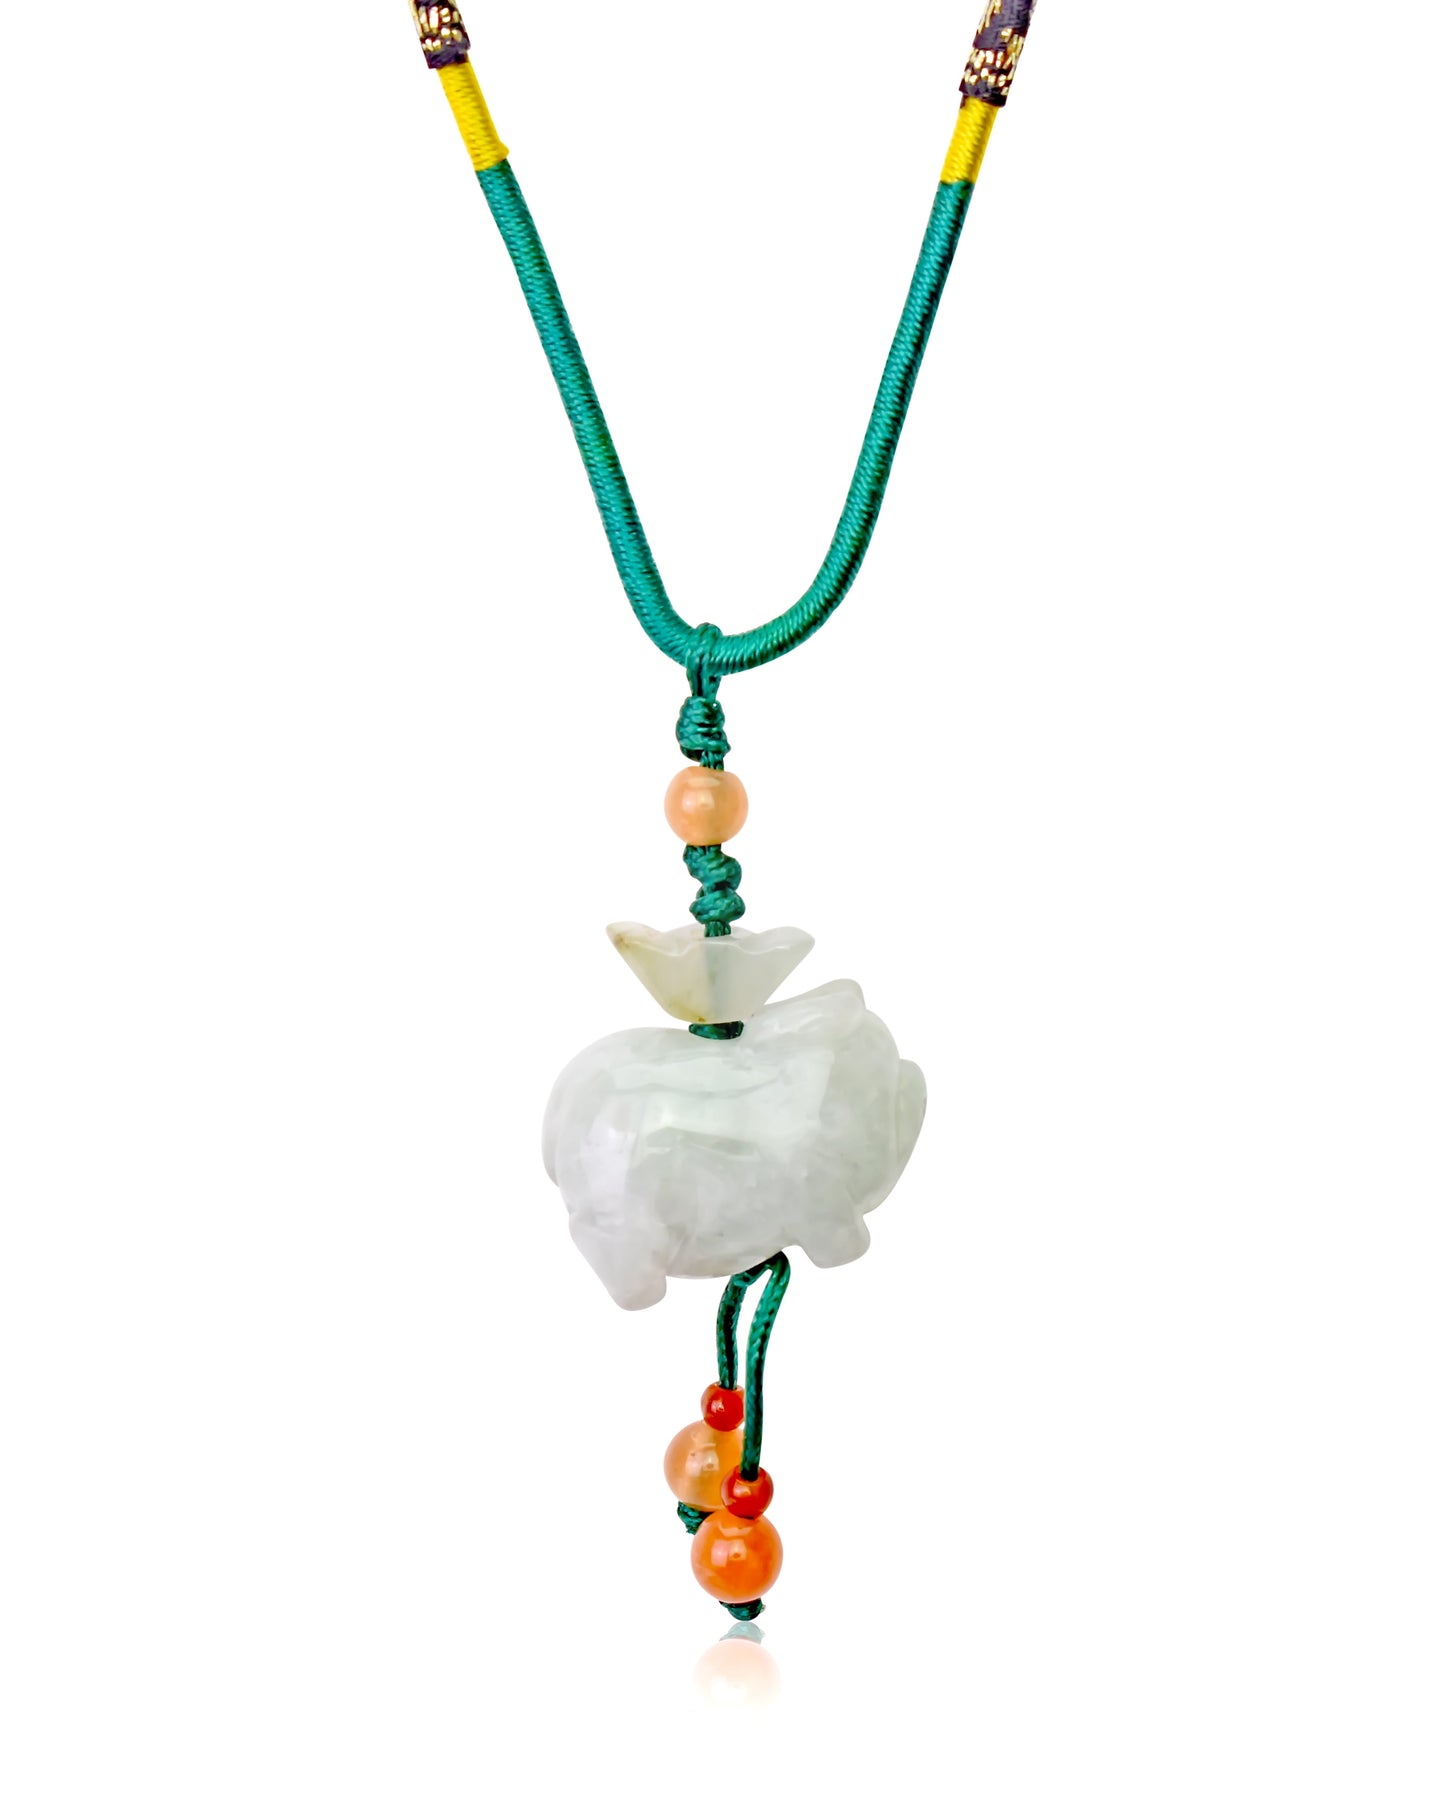 Shine with this Boar Chinese Zodiac Handmade Jade Necklace made with Green Ribbons